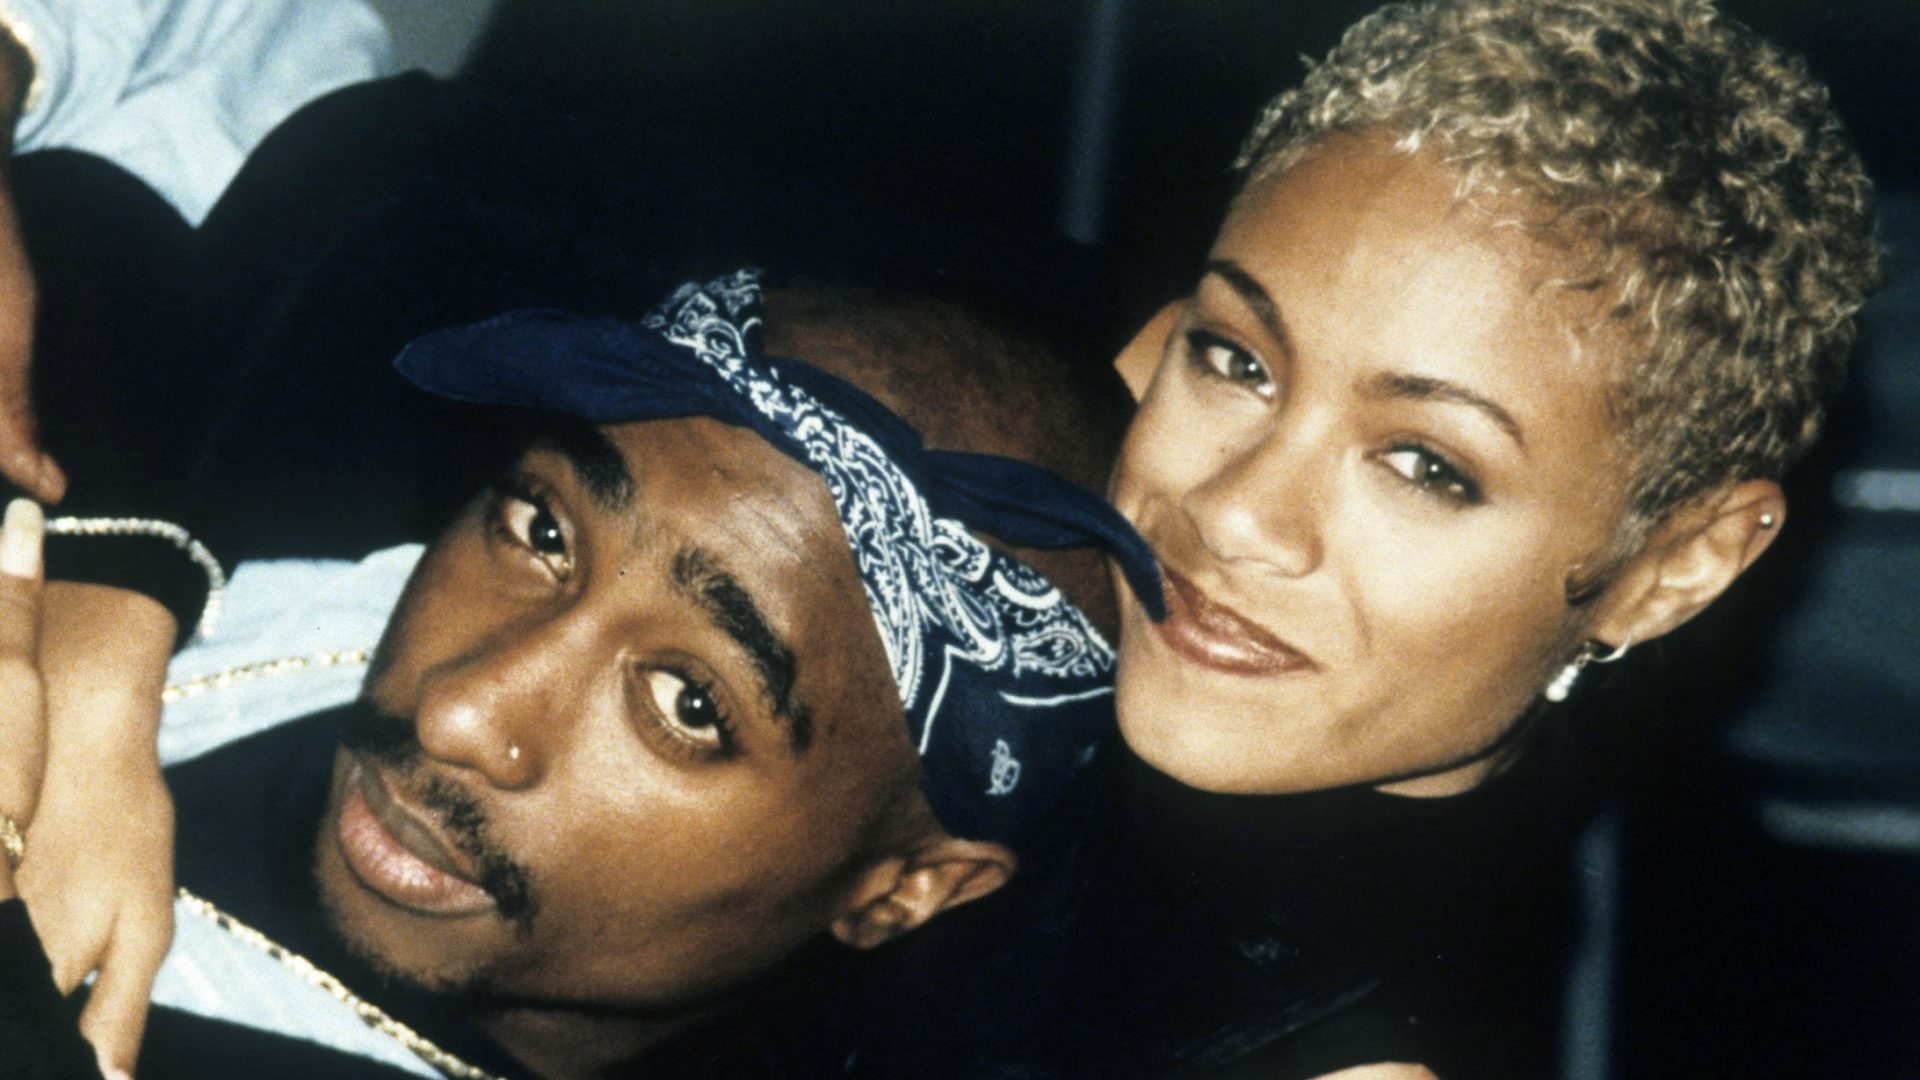 Blast From The Past! Social Media Reacts To Jada Pinkett Smith Sharing Throwback Video Of Her & Tupac (WATCH) thumbnail